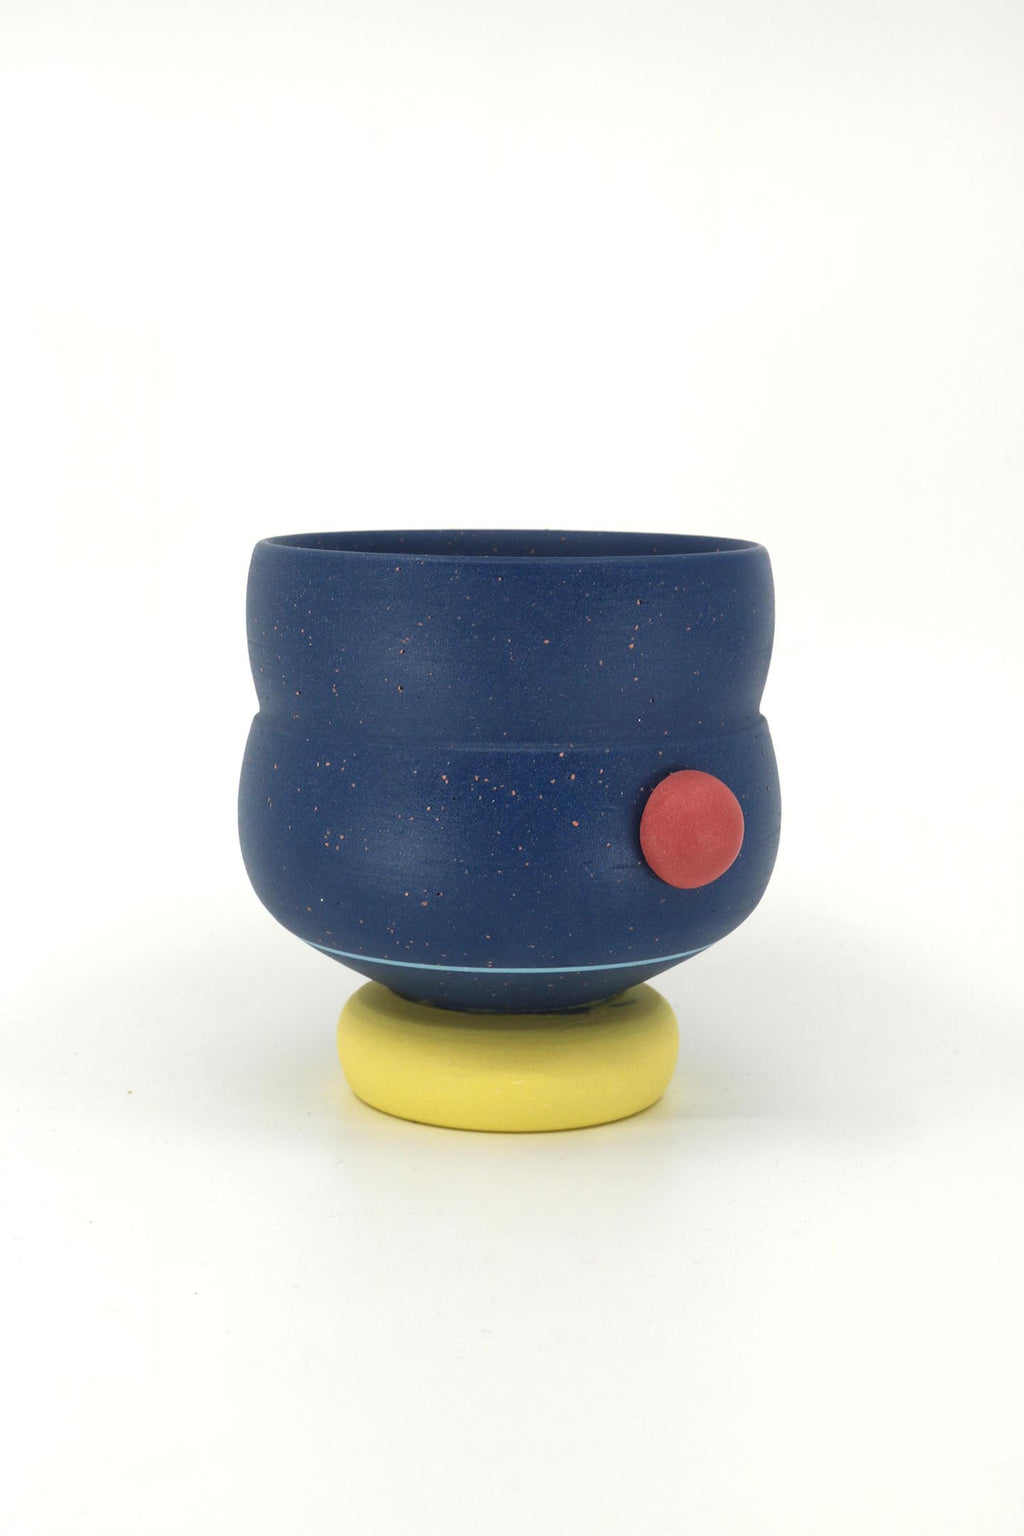 Chris Alveshere - Blueberry Speckle Cup